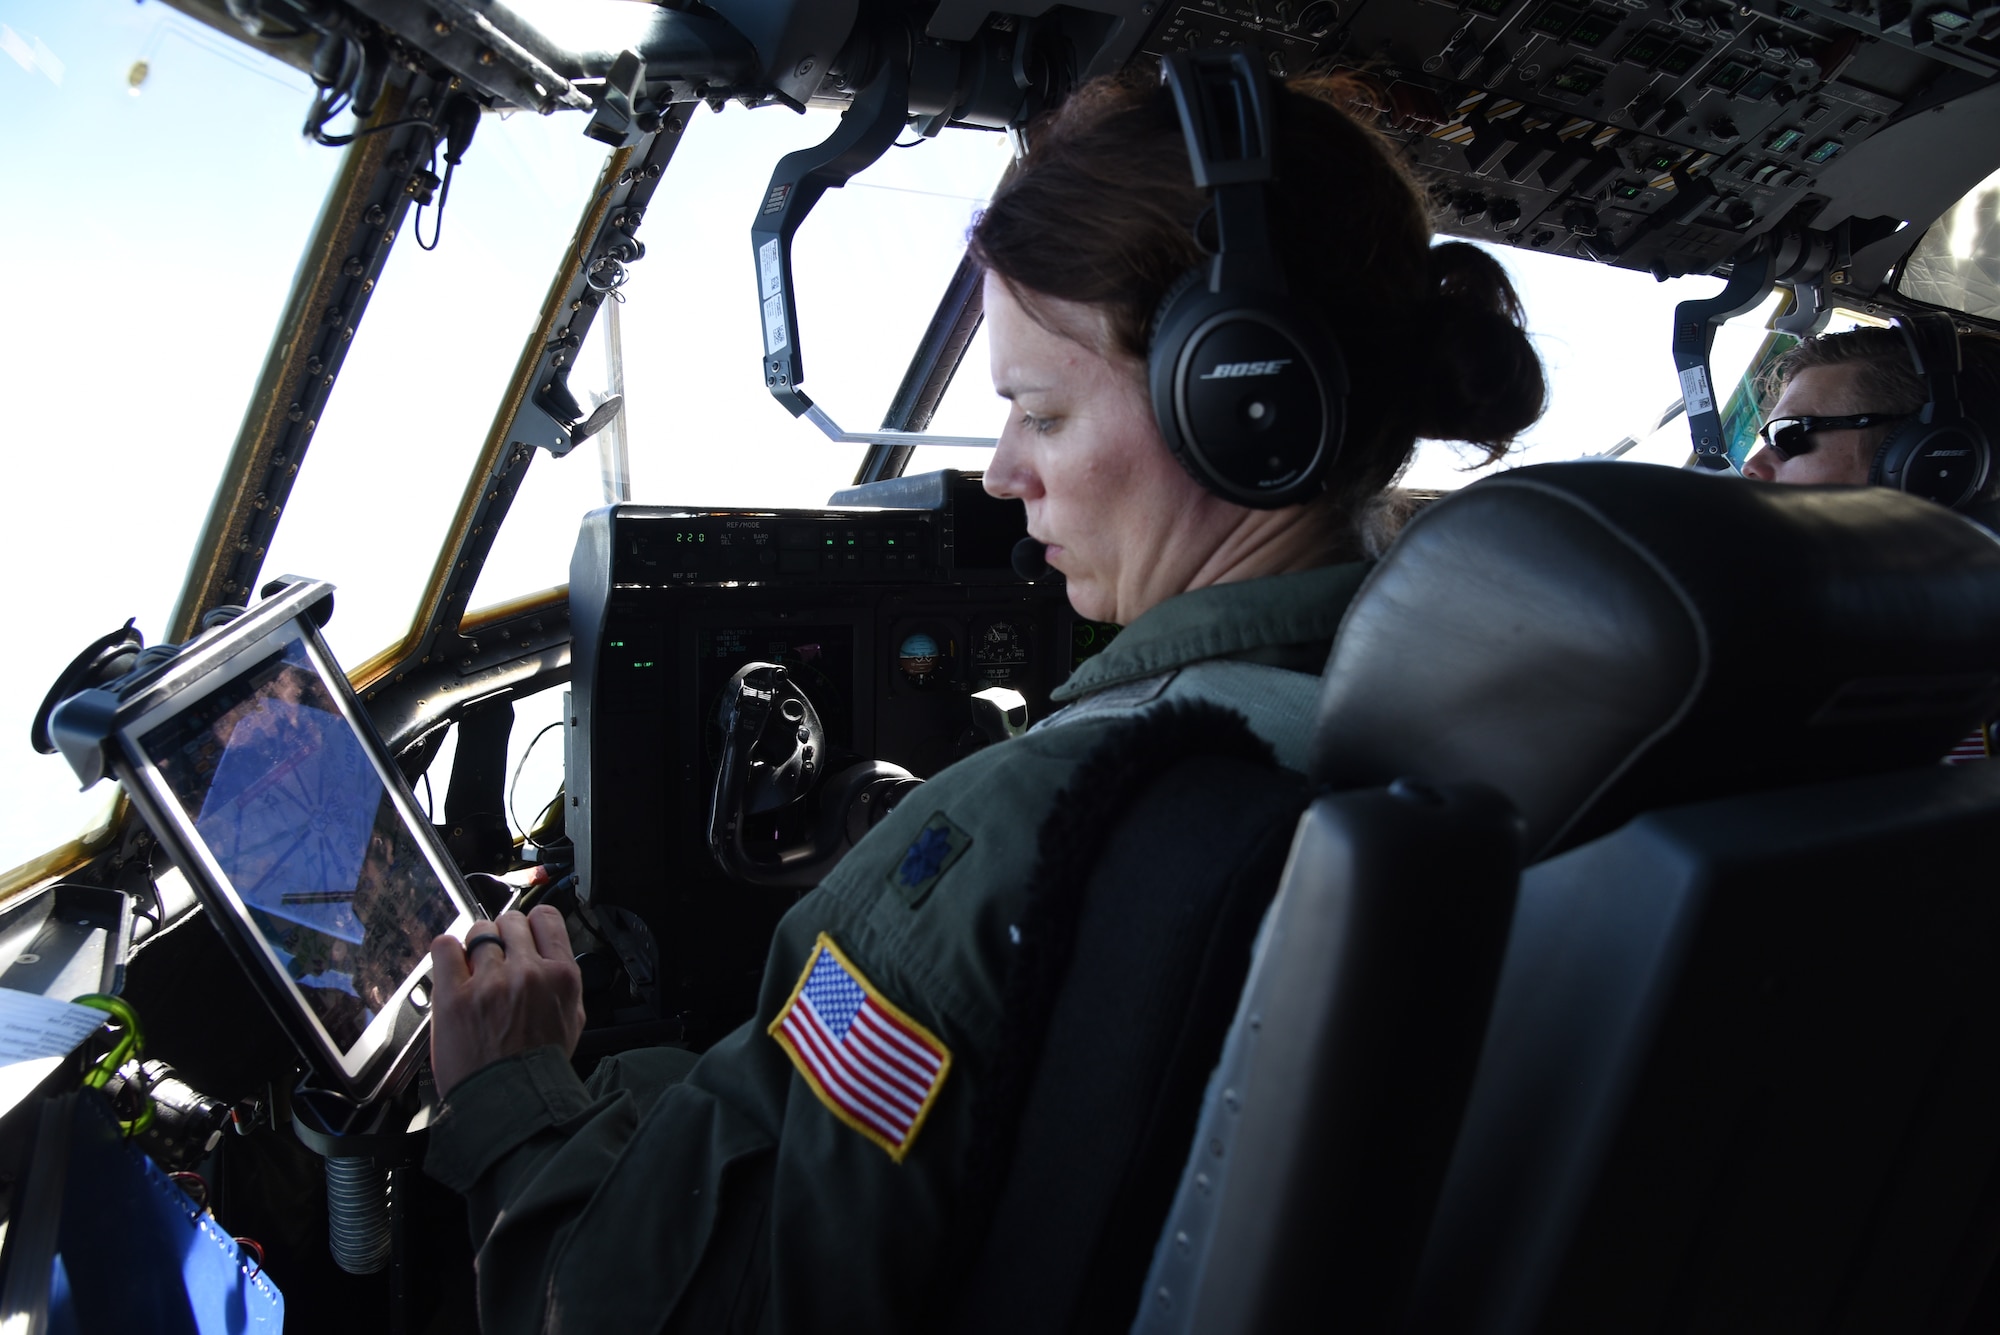 Lt. Col. Stephanie Brown, pilot for the 815th Airlift Squadron from the 403rd Wing, checks the instruments and flight path for the air/land mission for exercise Swift Response 19, June 19, 2019. The exercise is one of the premier military crisis response training events featuring high readiness airborne forces from eight NATO nations. Activities include intermediate staging base operations, multiple airborne operations, and several air assault operations. The Swift Response exercises have had great success in creating a foundation for the strong relationships we share with several European allies and partners today. (U.S. Air Force photo by Master Sgt. Jessica Kendziorek)